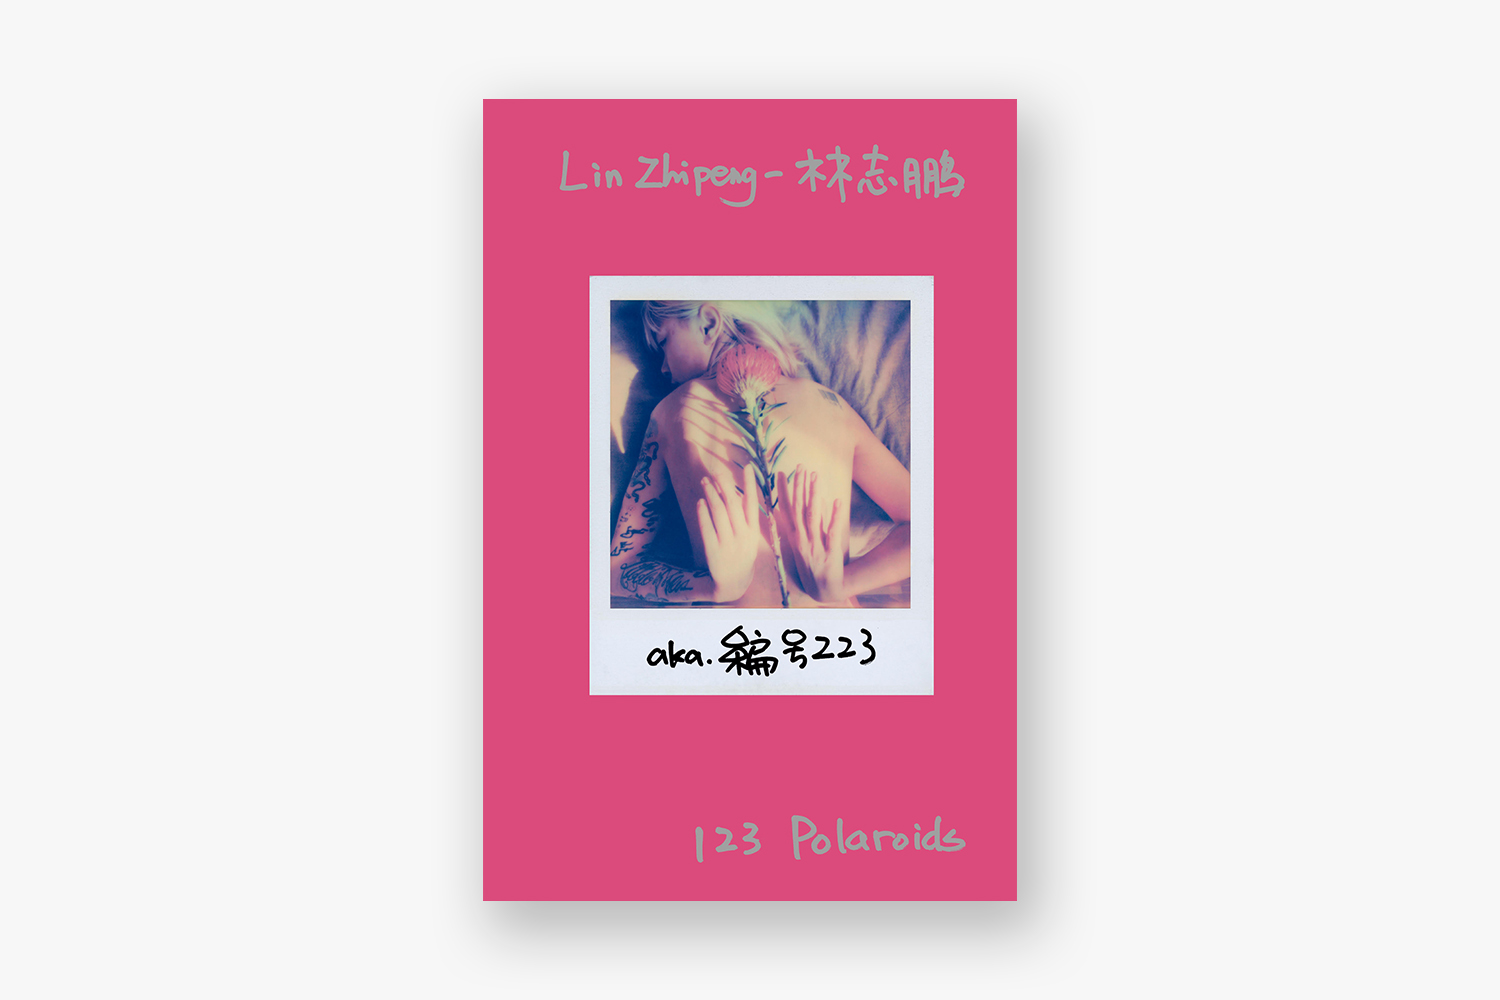 123 polaroids by lin zhipeng 223 book photography of china FINAL COVER - 123 Polaroids by Lin Zhipeng aka No.223 - Pink Cover |  - 123 Polaroids - Lin Zhipeng (No.223) - Pink Cover